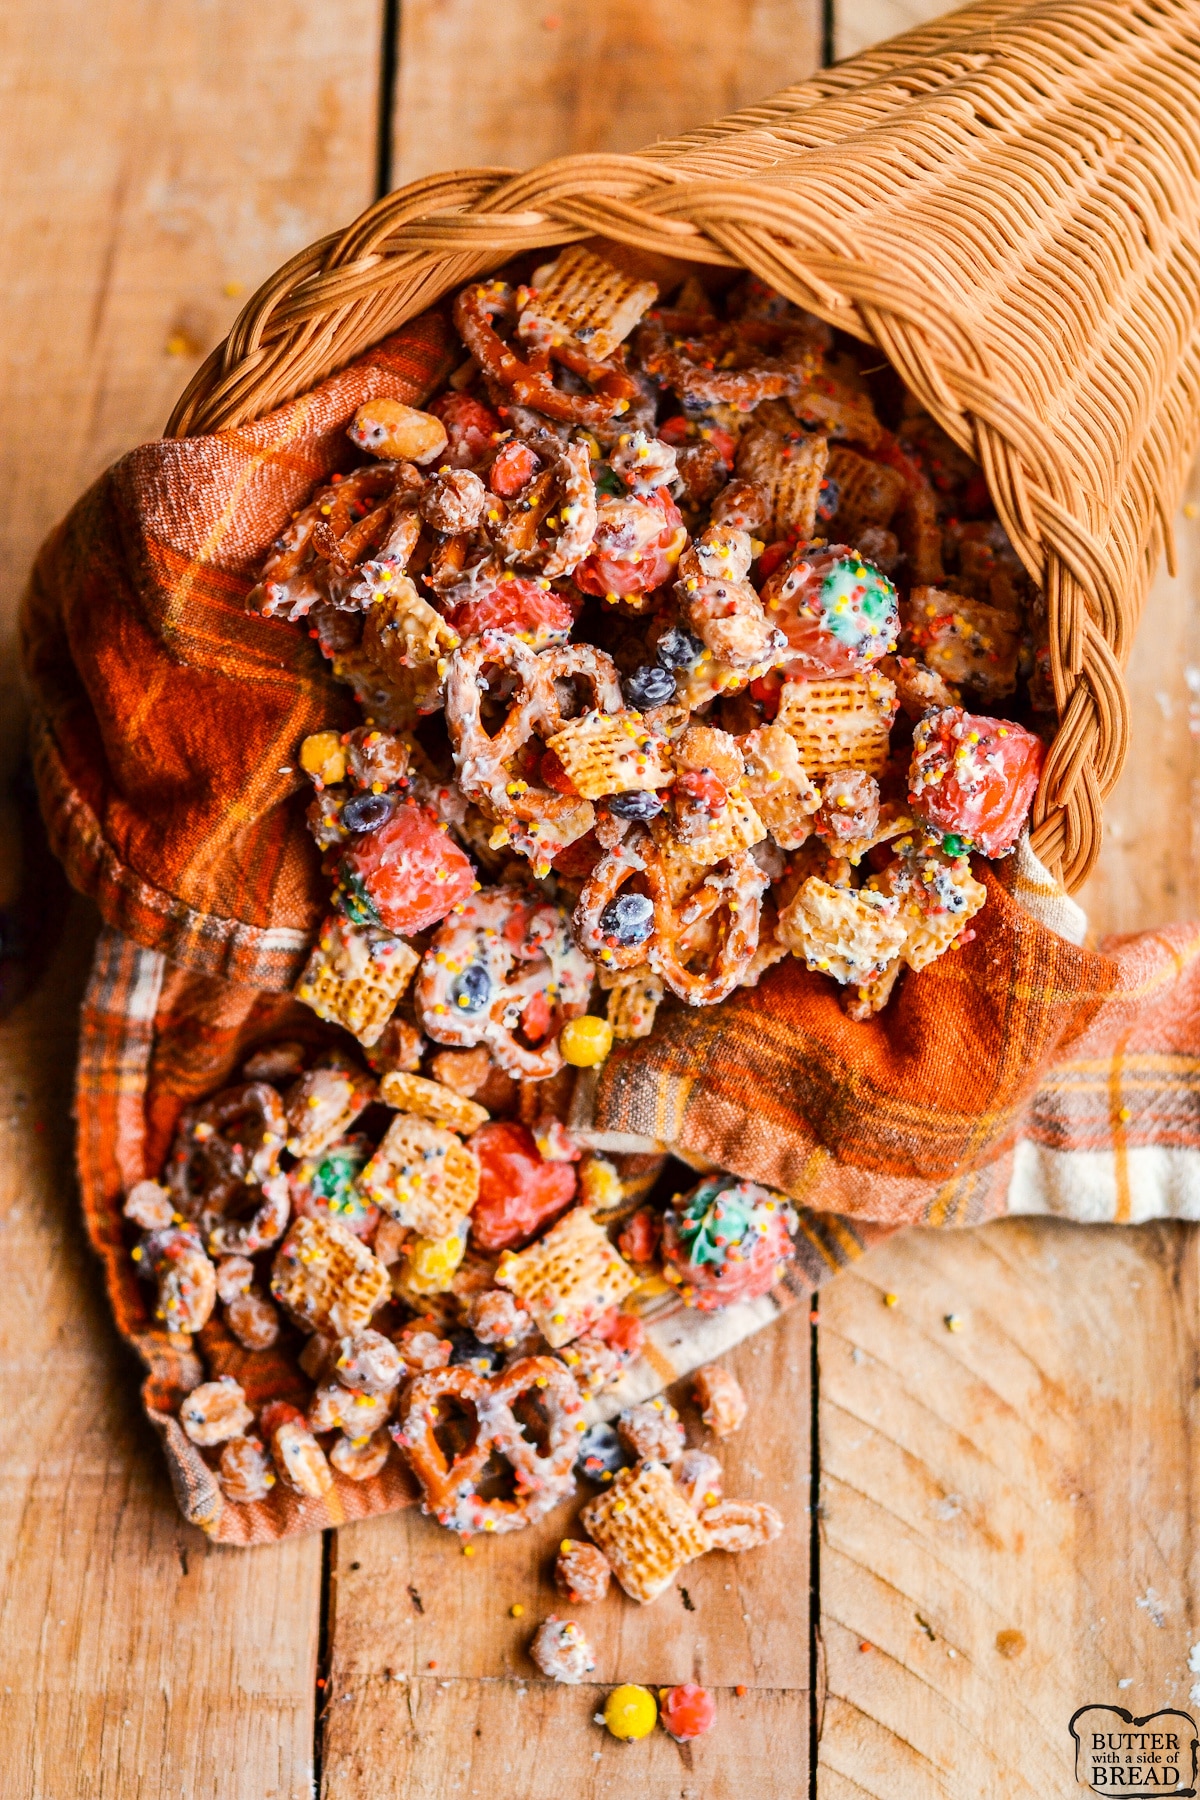 Snack mix coated in white chocolate